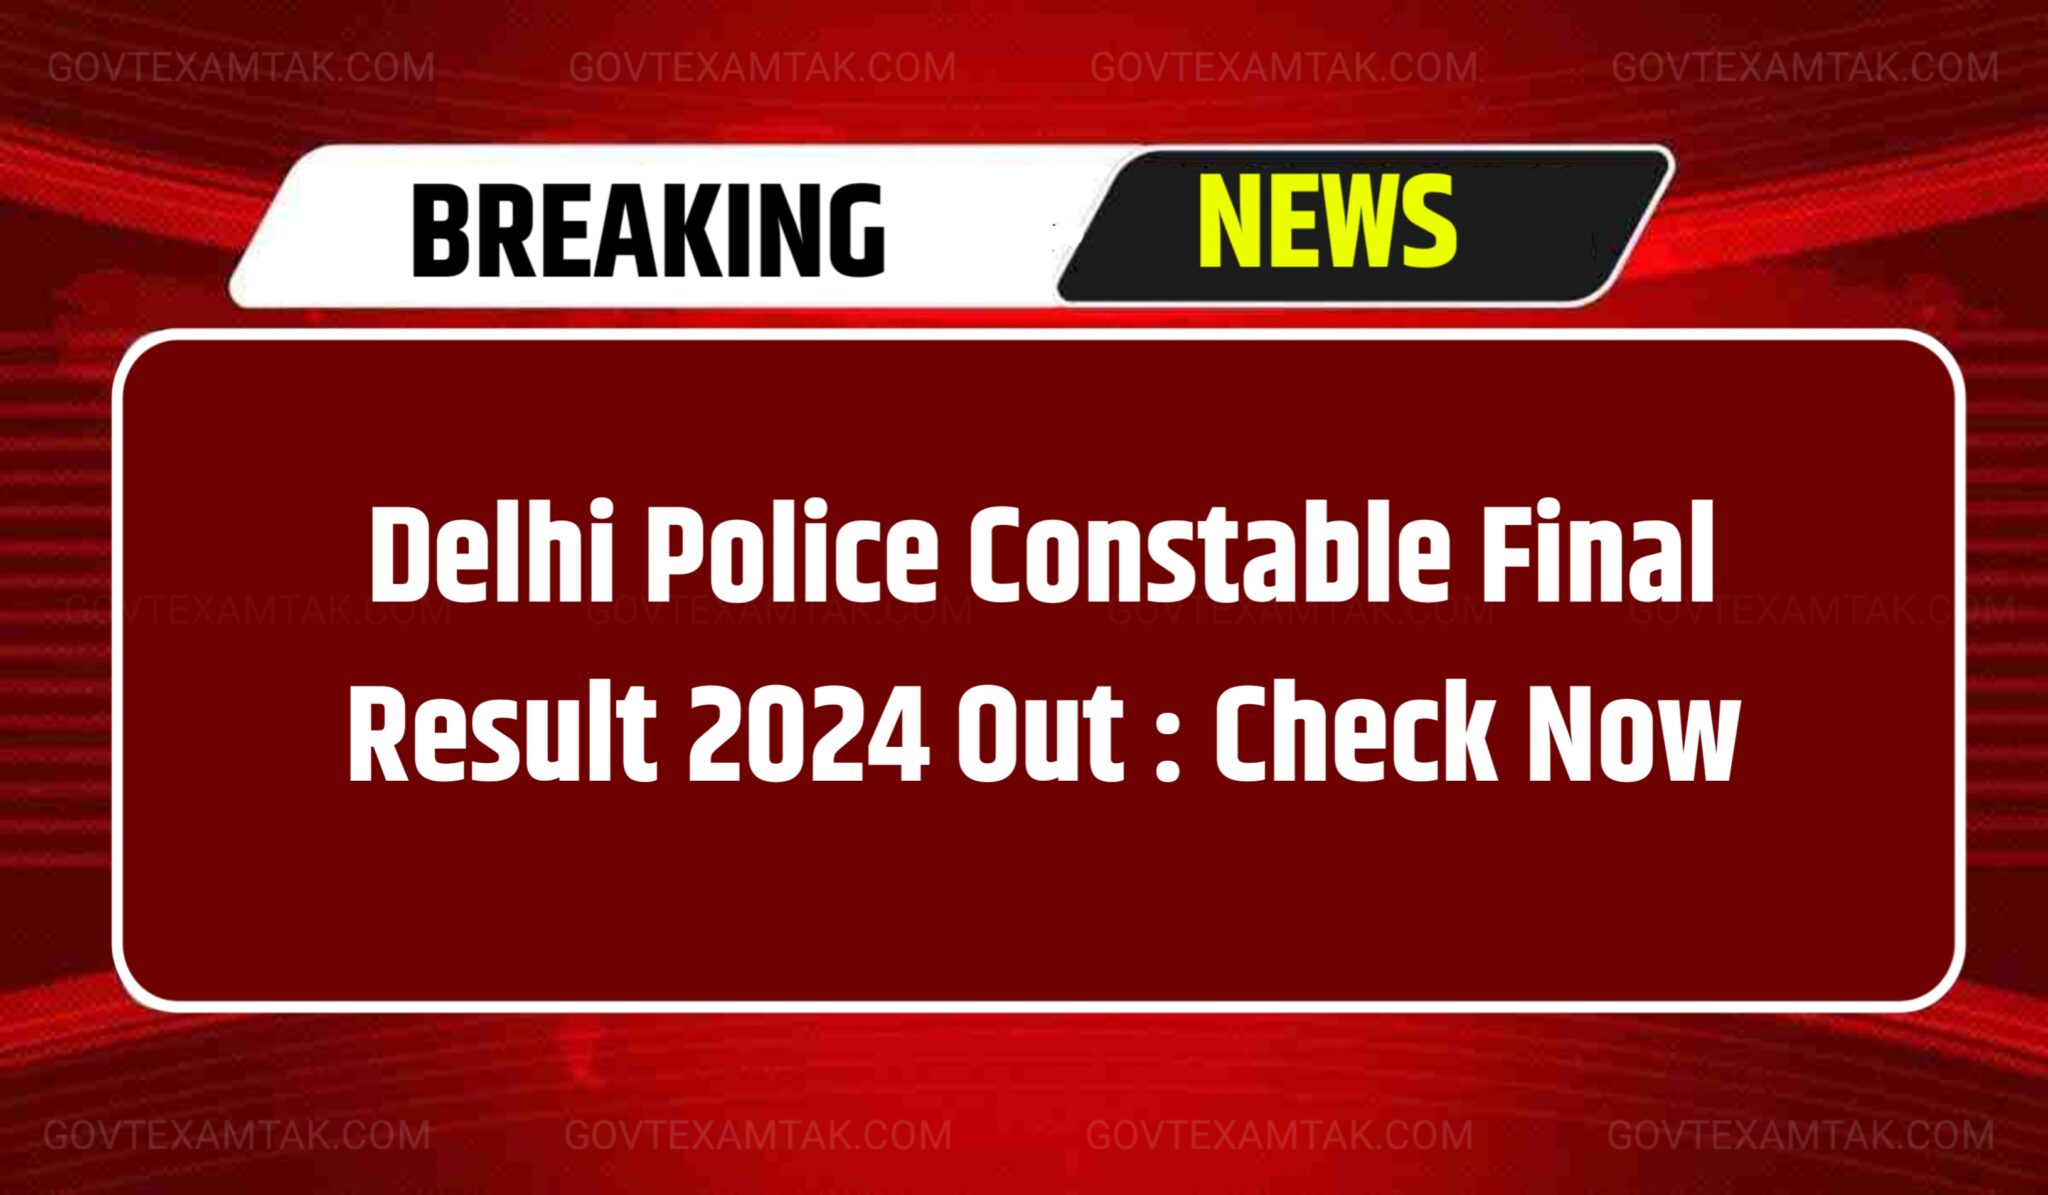 Delhi Police Constable Final Result 2024 Out Check Now Govt Exam Tak